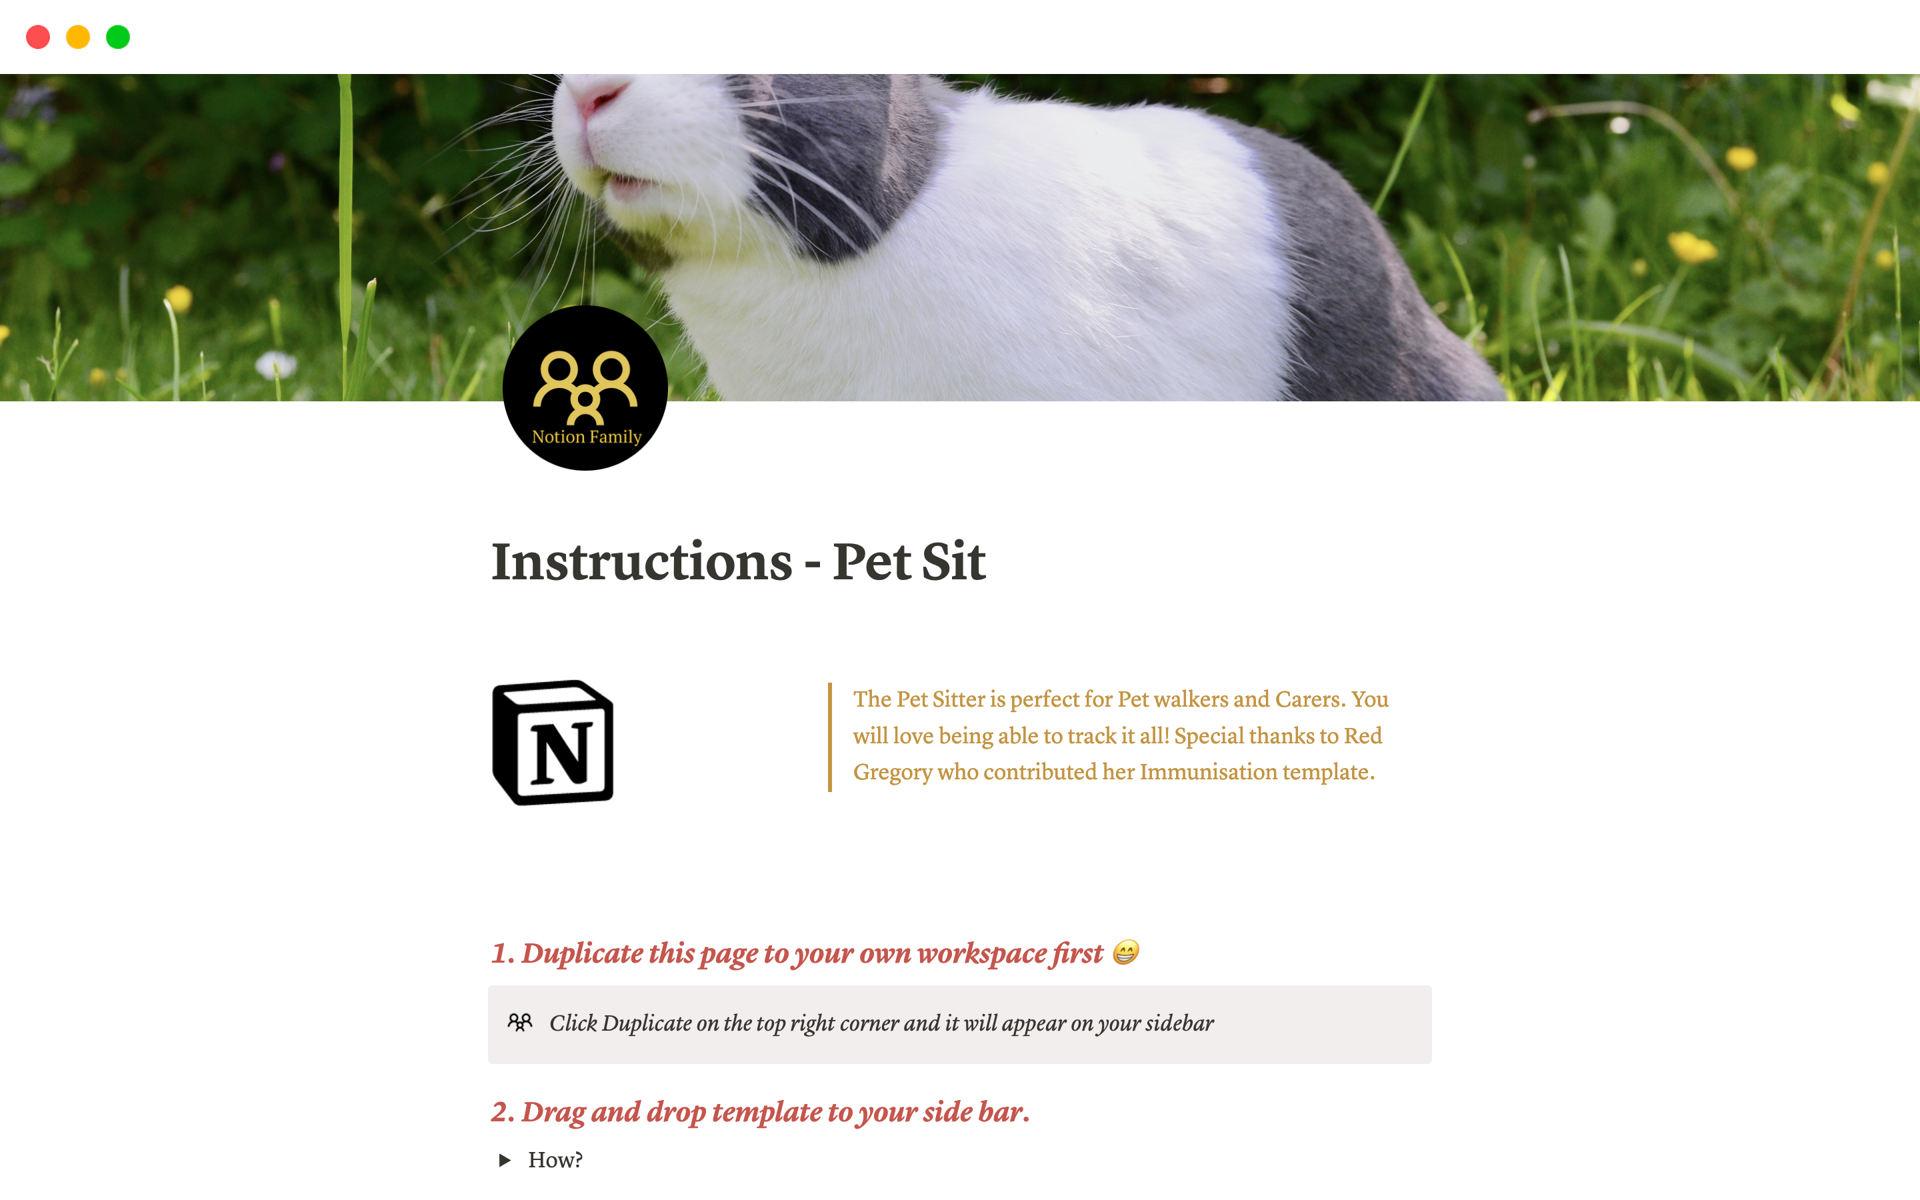 If you run your own pet sitting business from home, this tool is perfect for tracking clients (families and pets), jobs, finances, paperwork, and more.